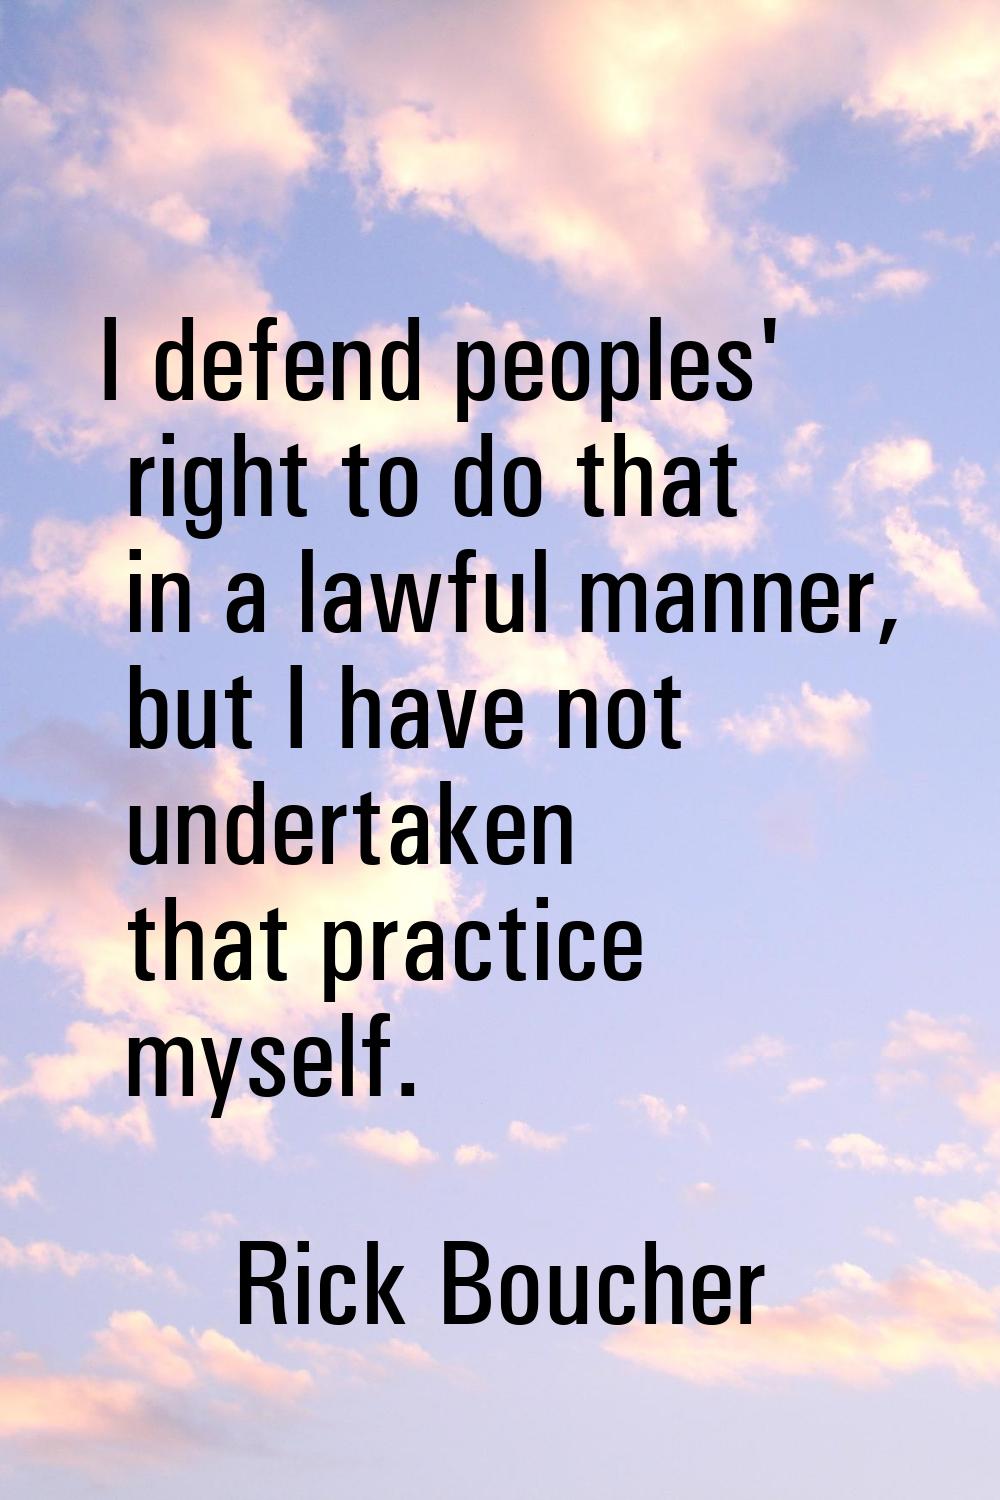 I defend peoples' right to do that in a lawful manner, but I have not undertaken that practice myse